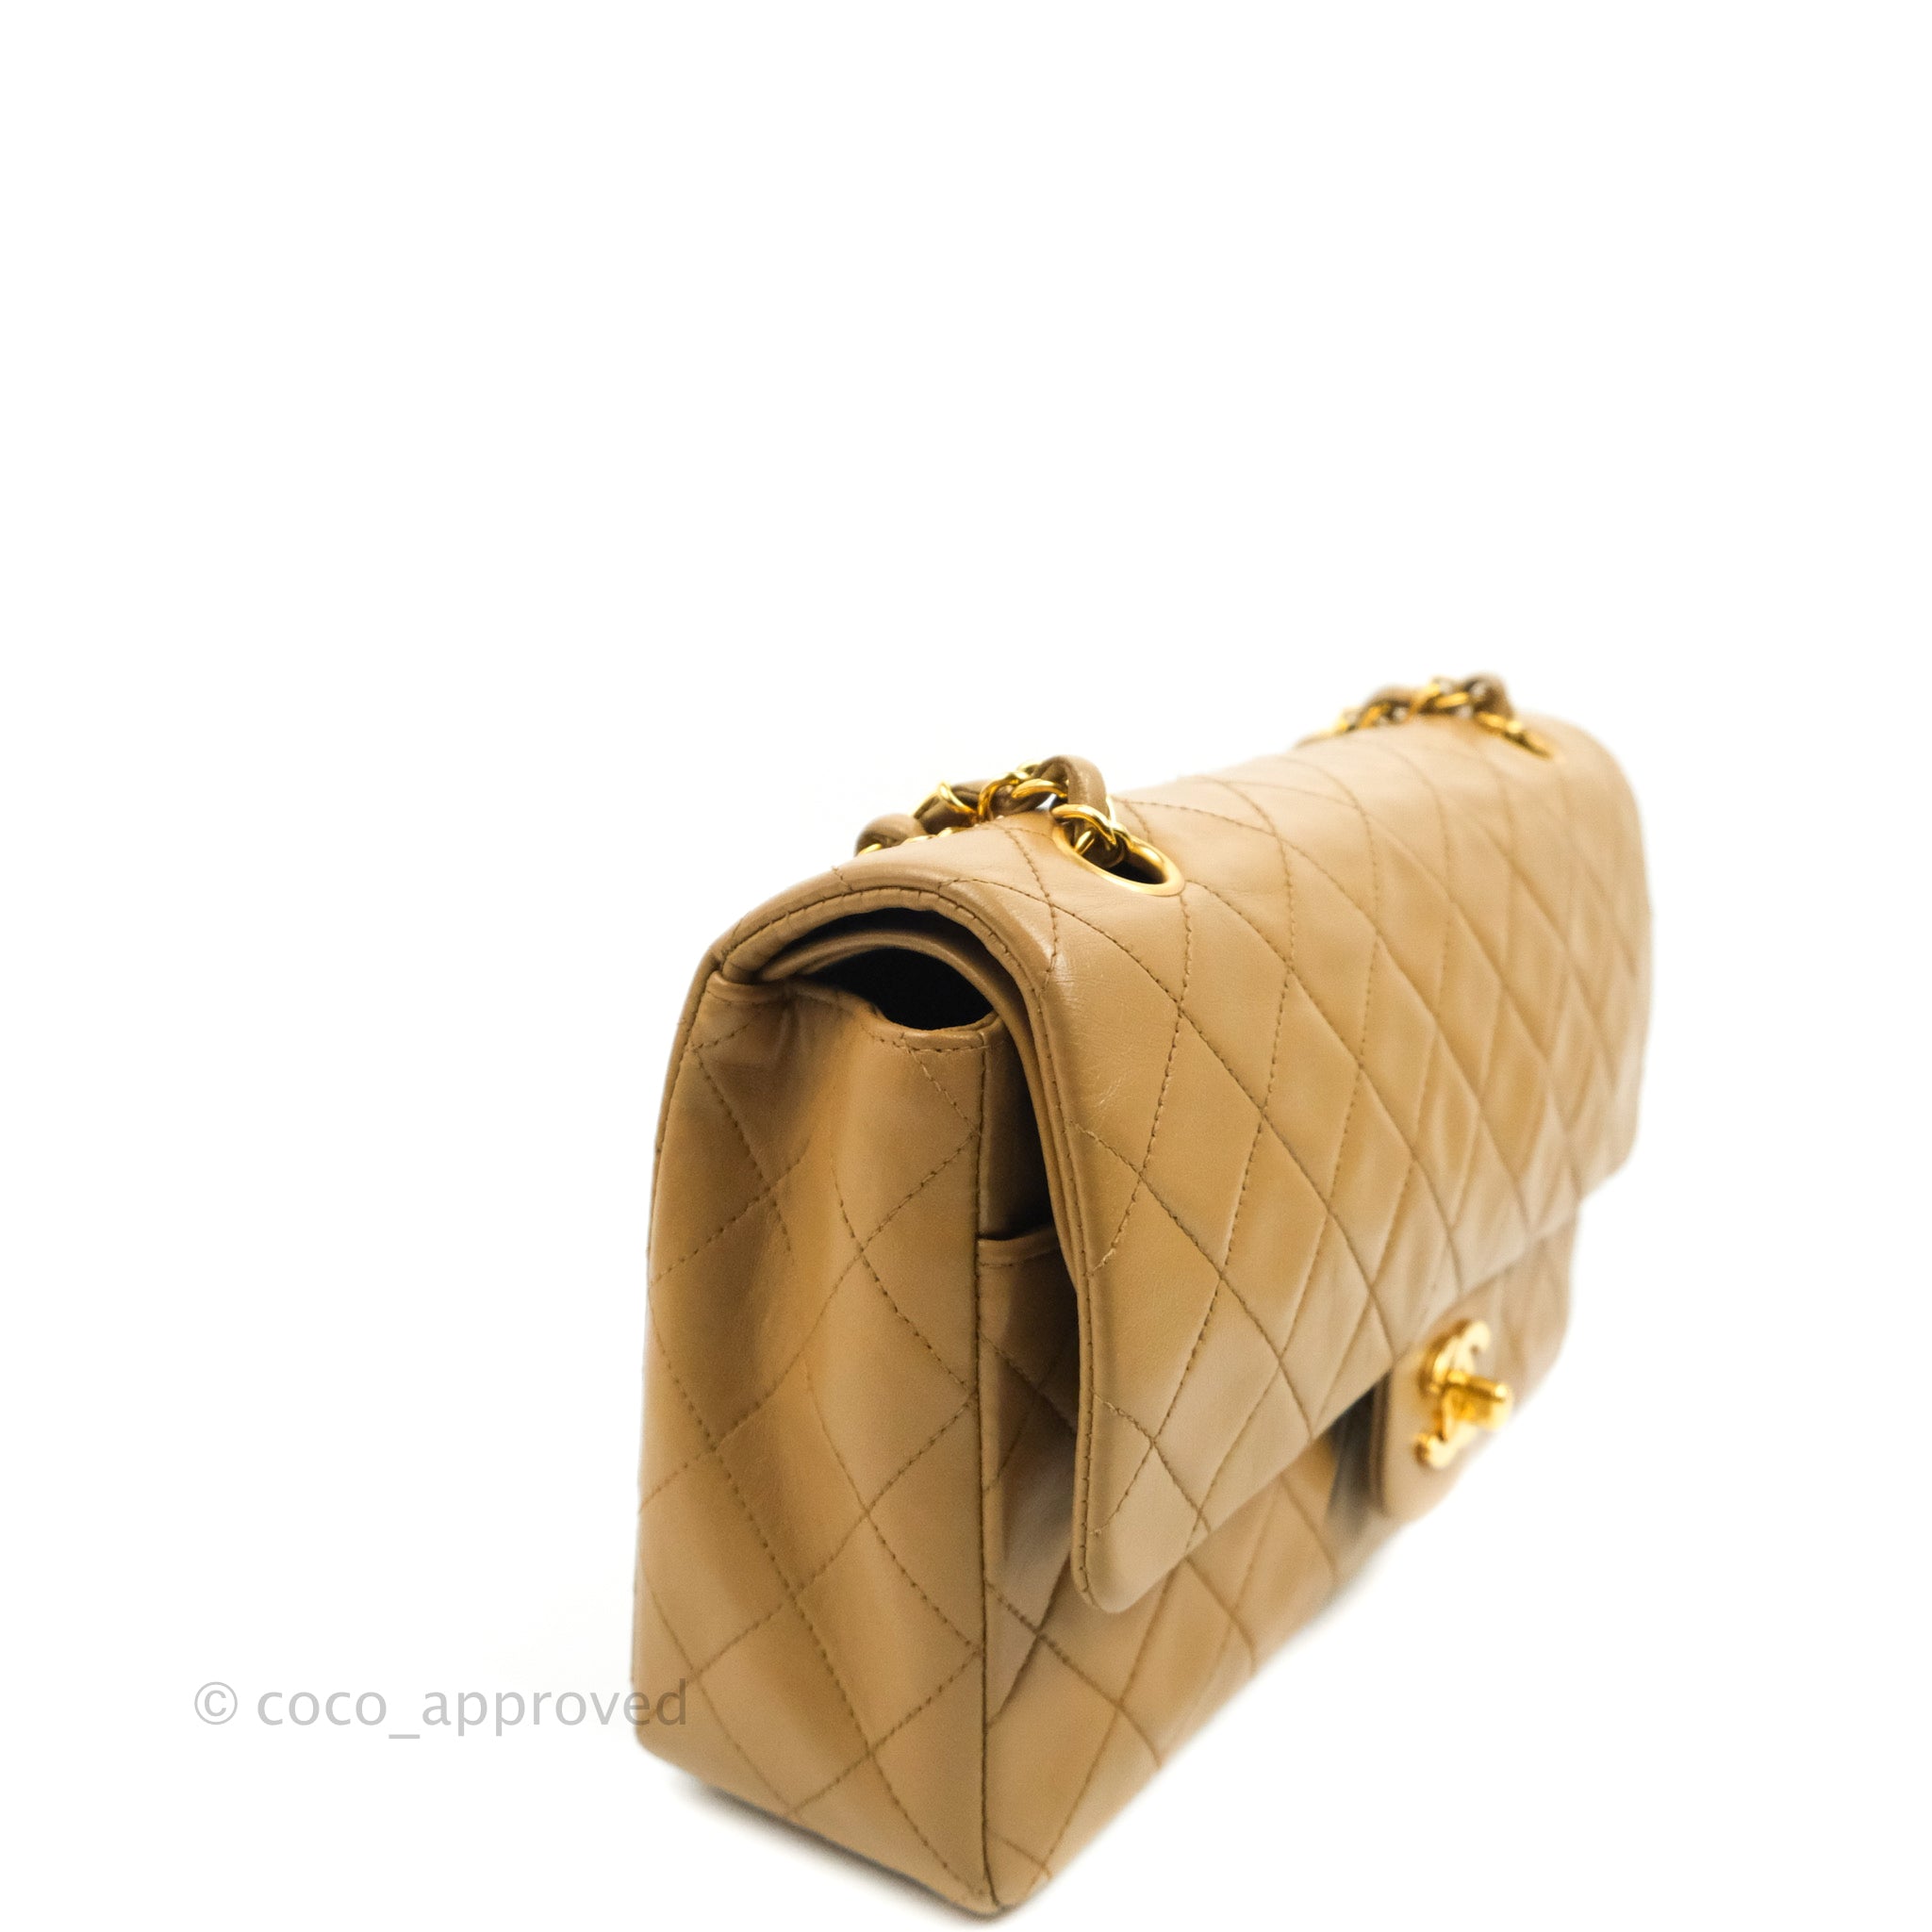 chanel bag with gold hardware